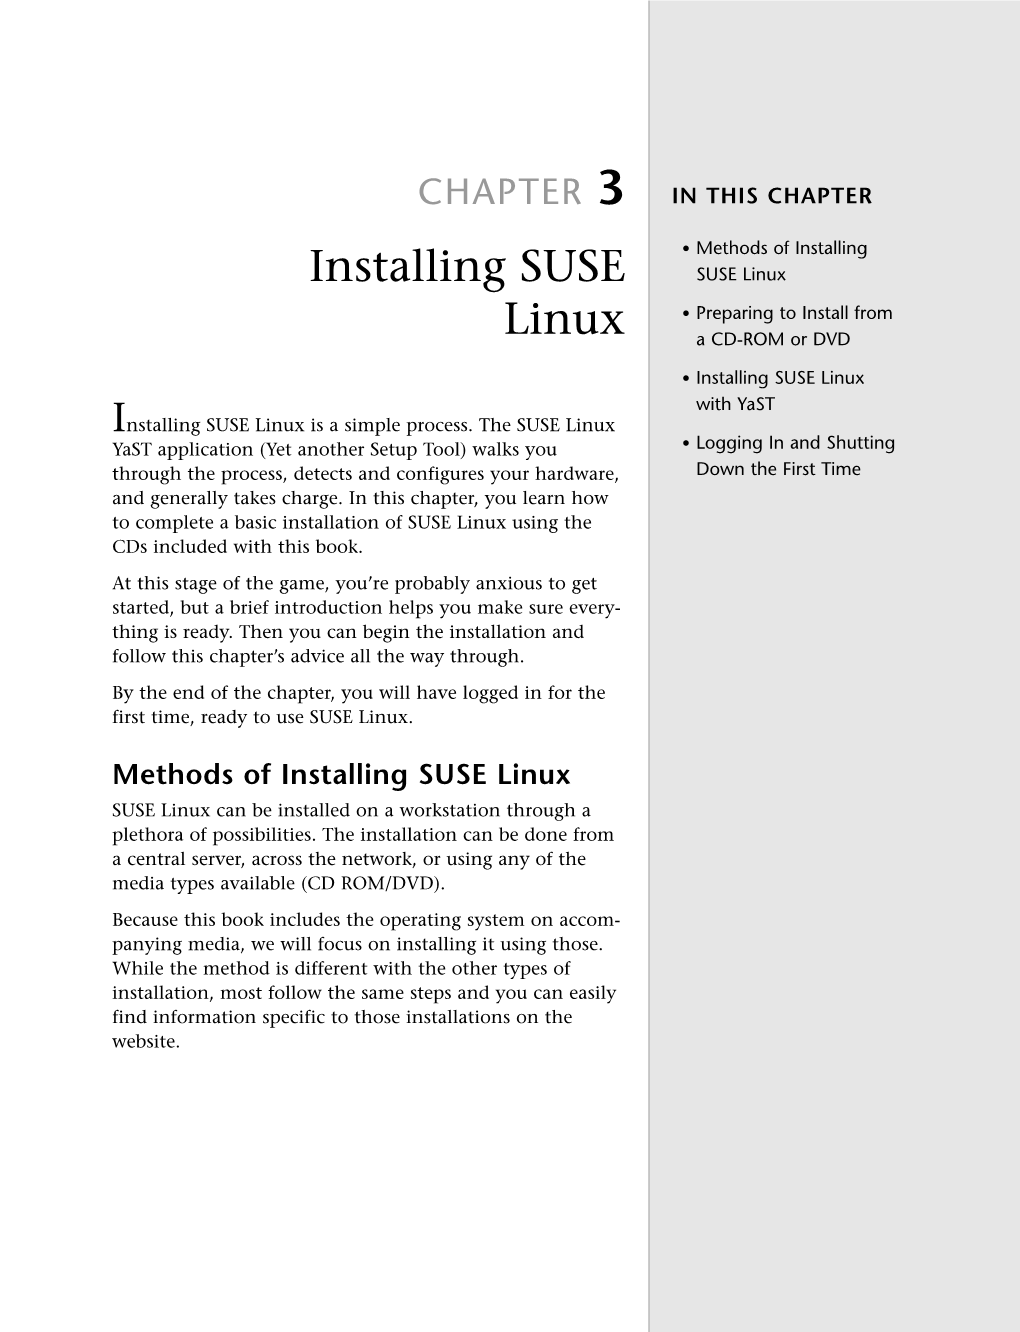 Installing SUSE Linux with Yast Installing SUSE Linux Is a Simple Process